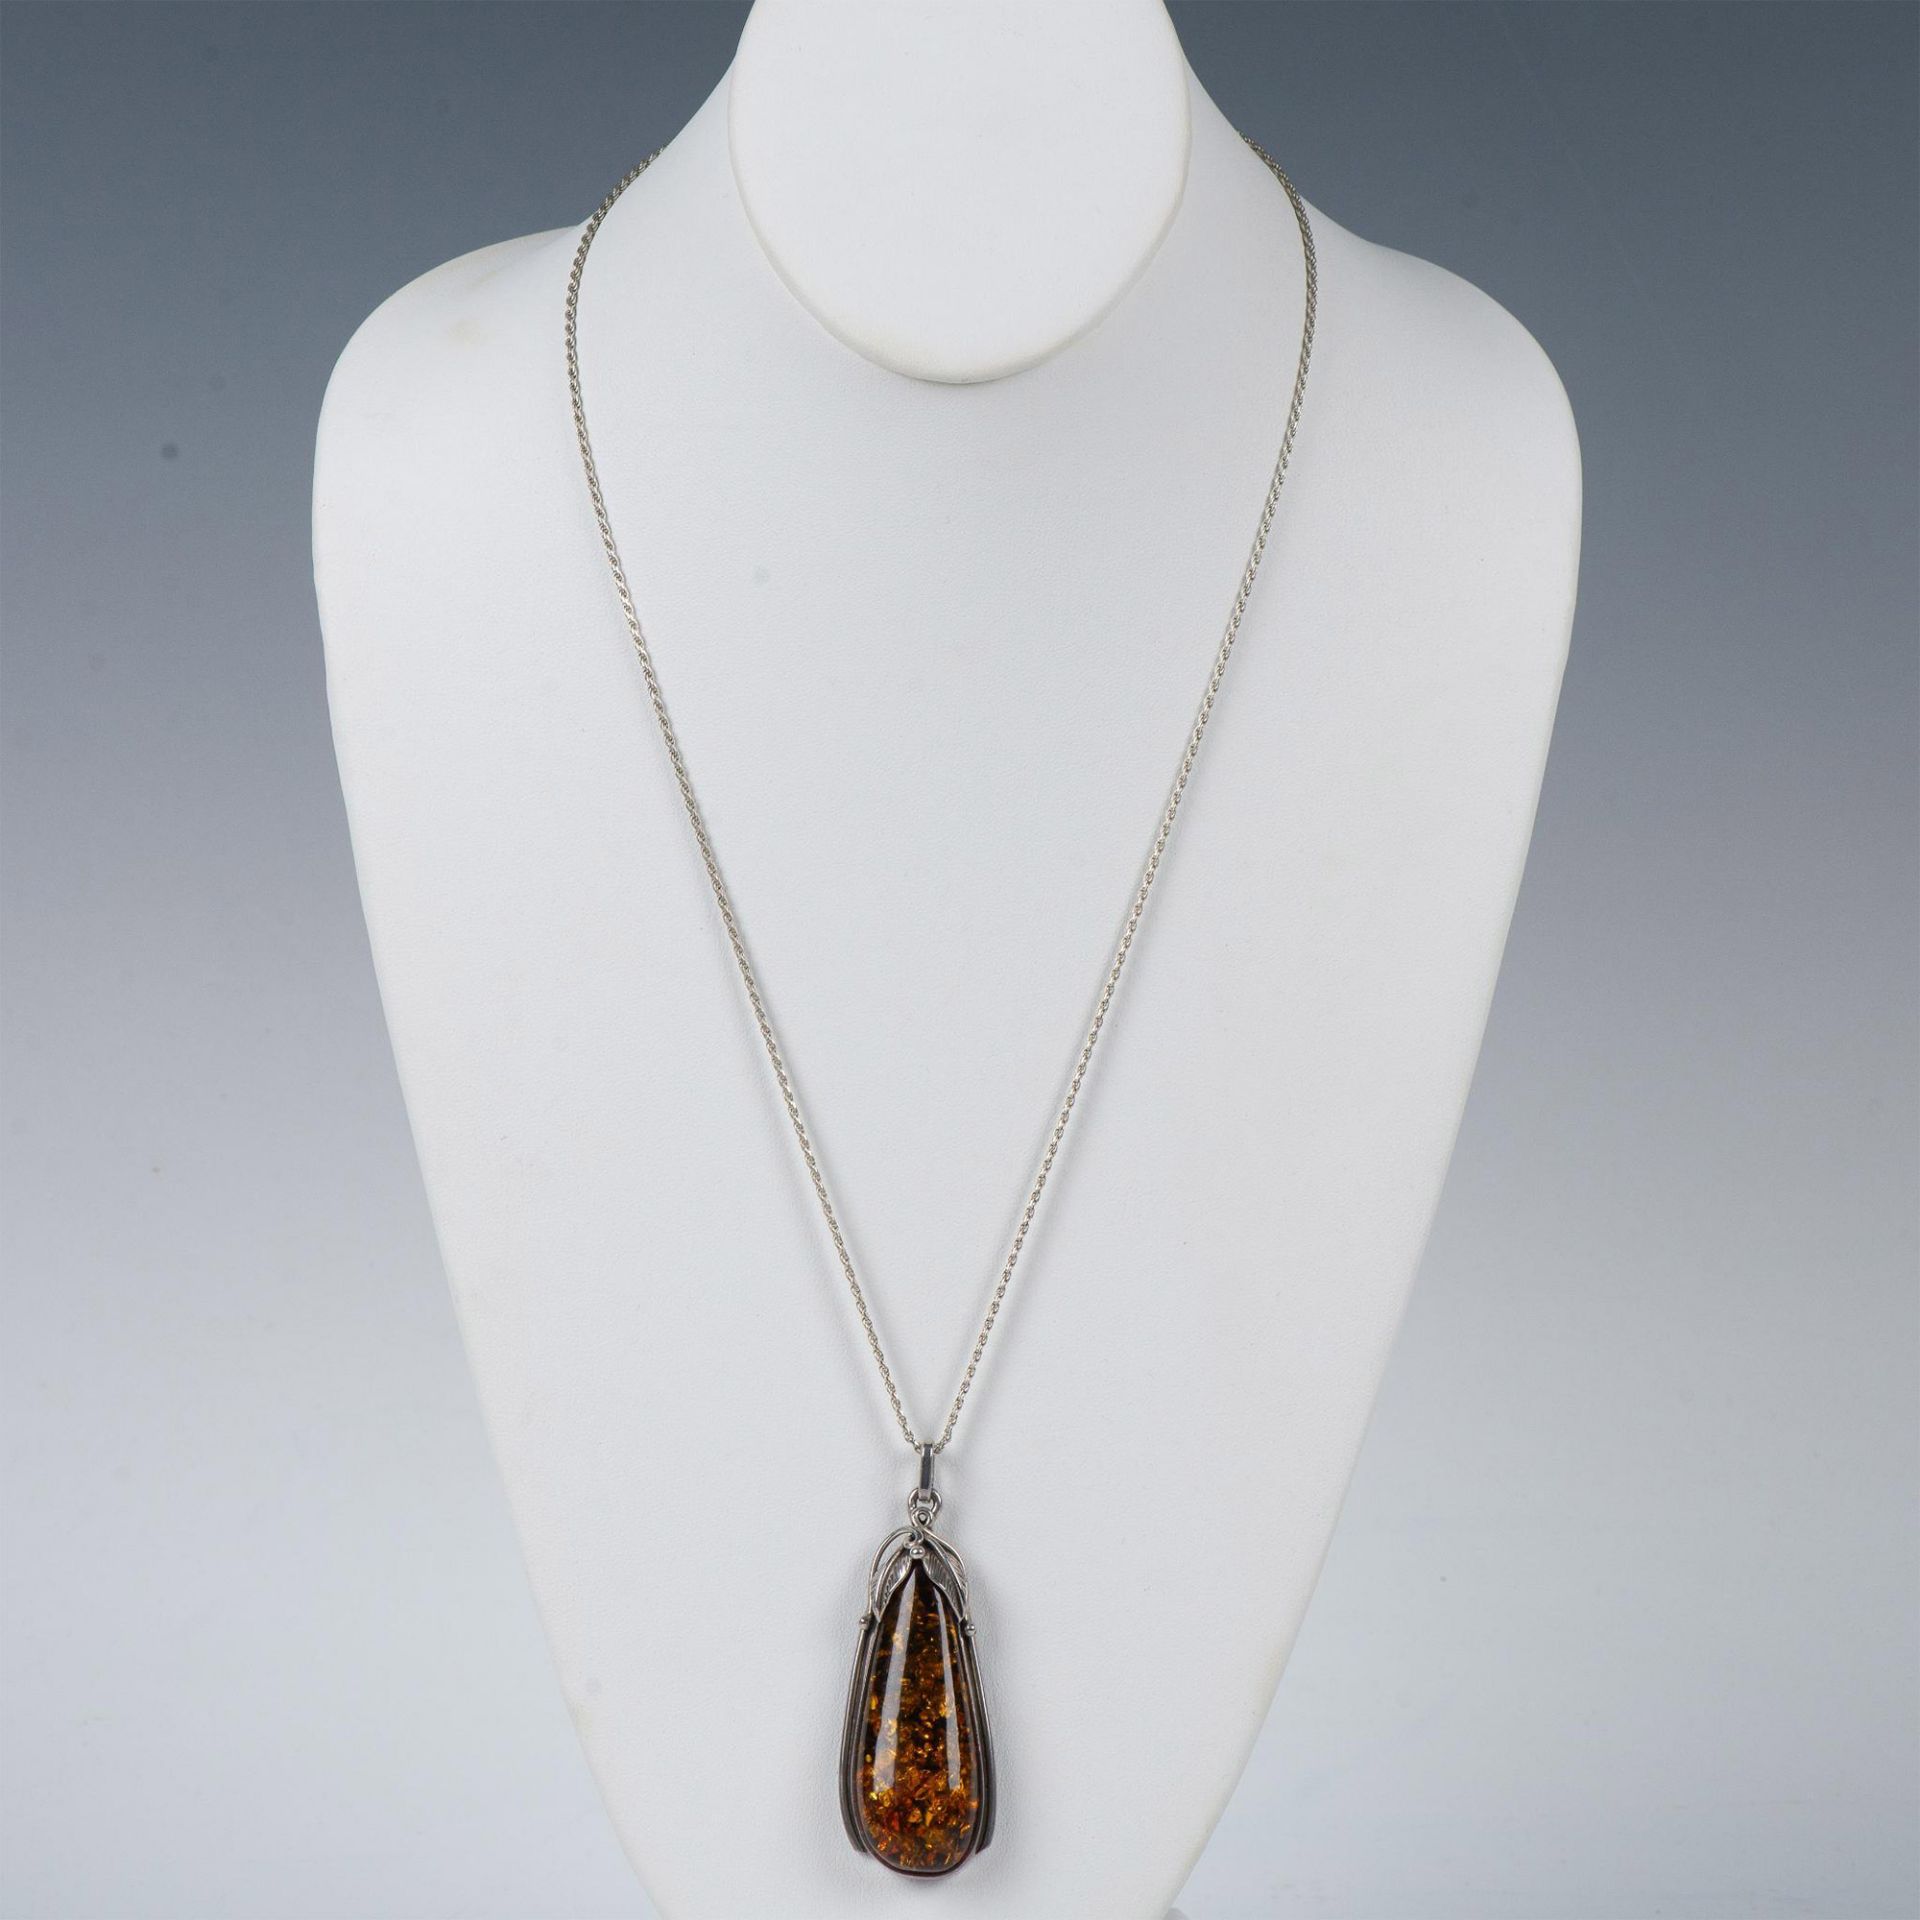 Gorgeous Sterling Silver and Amber Necklace and Ring - Image 7 of 10